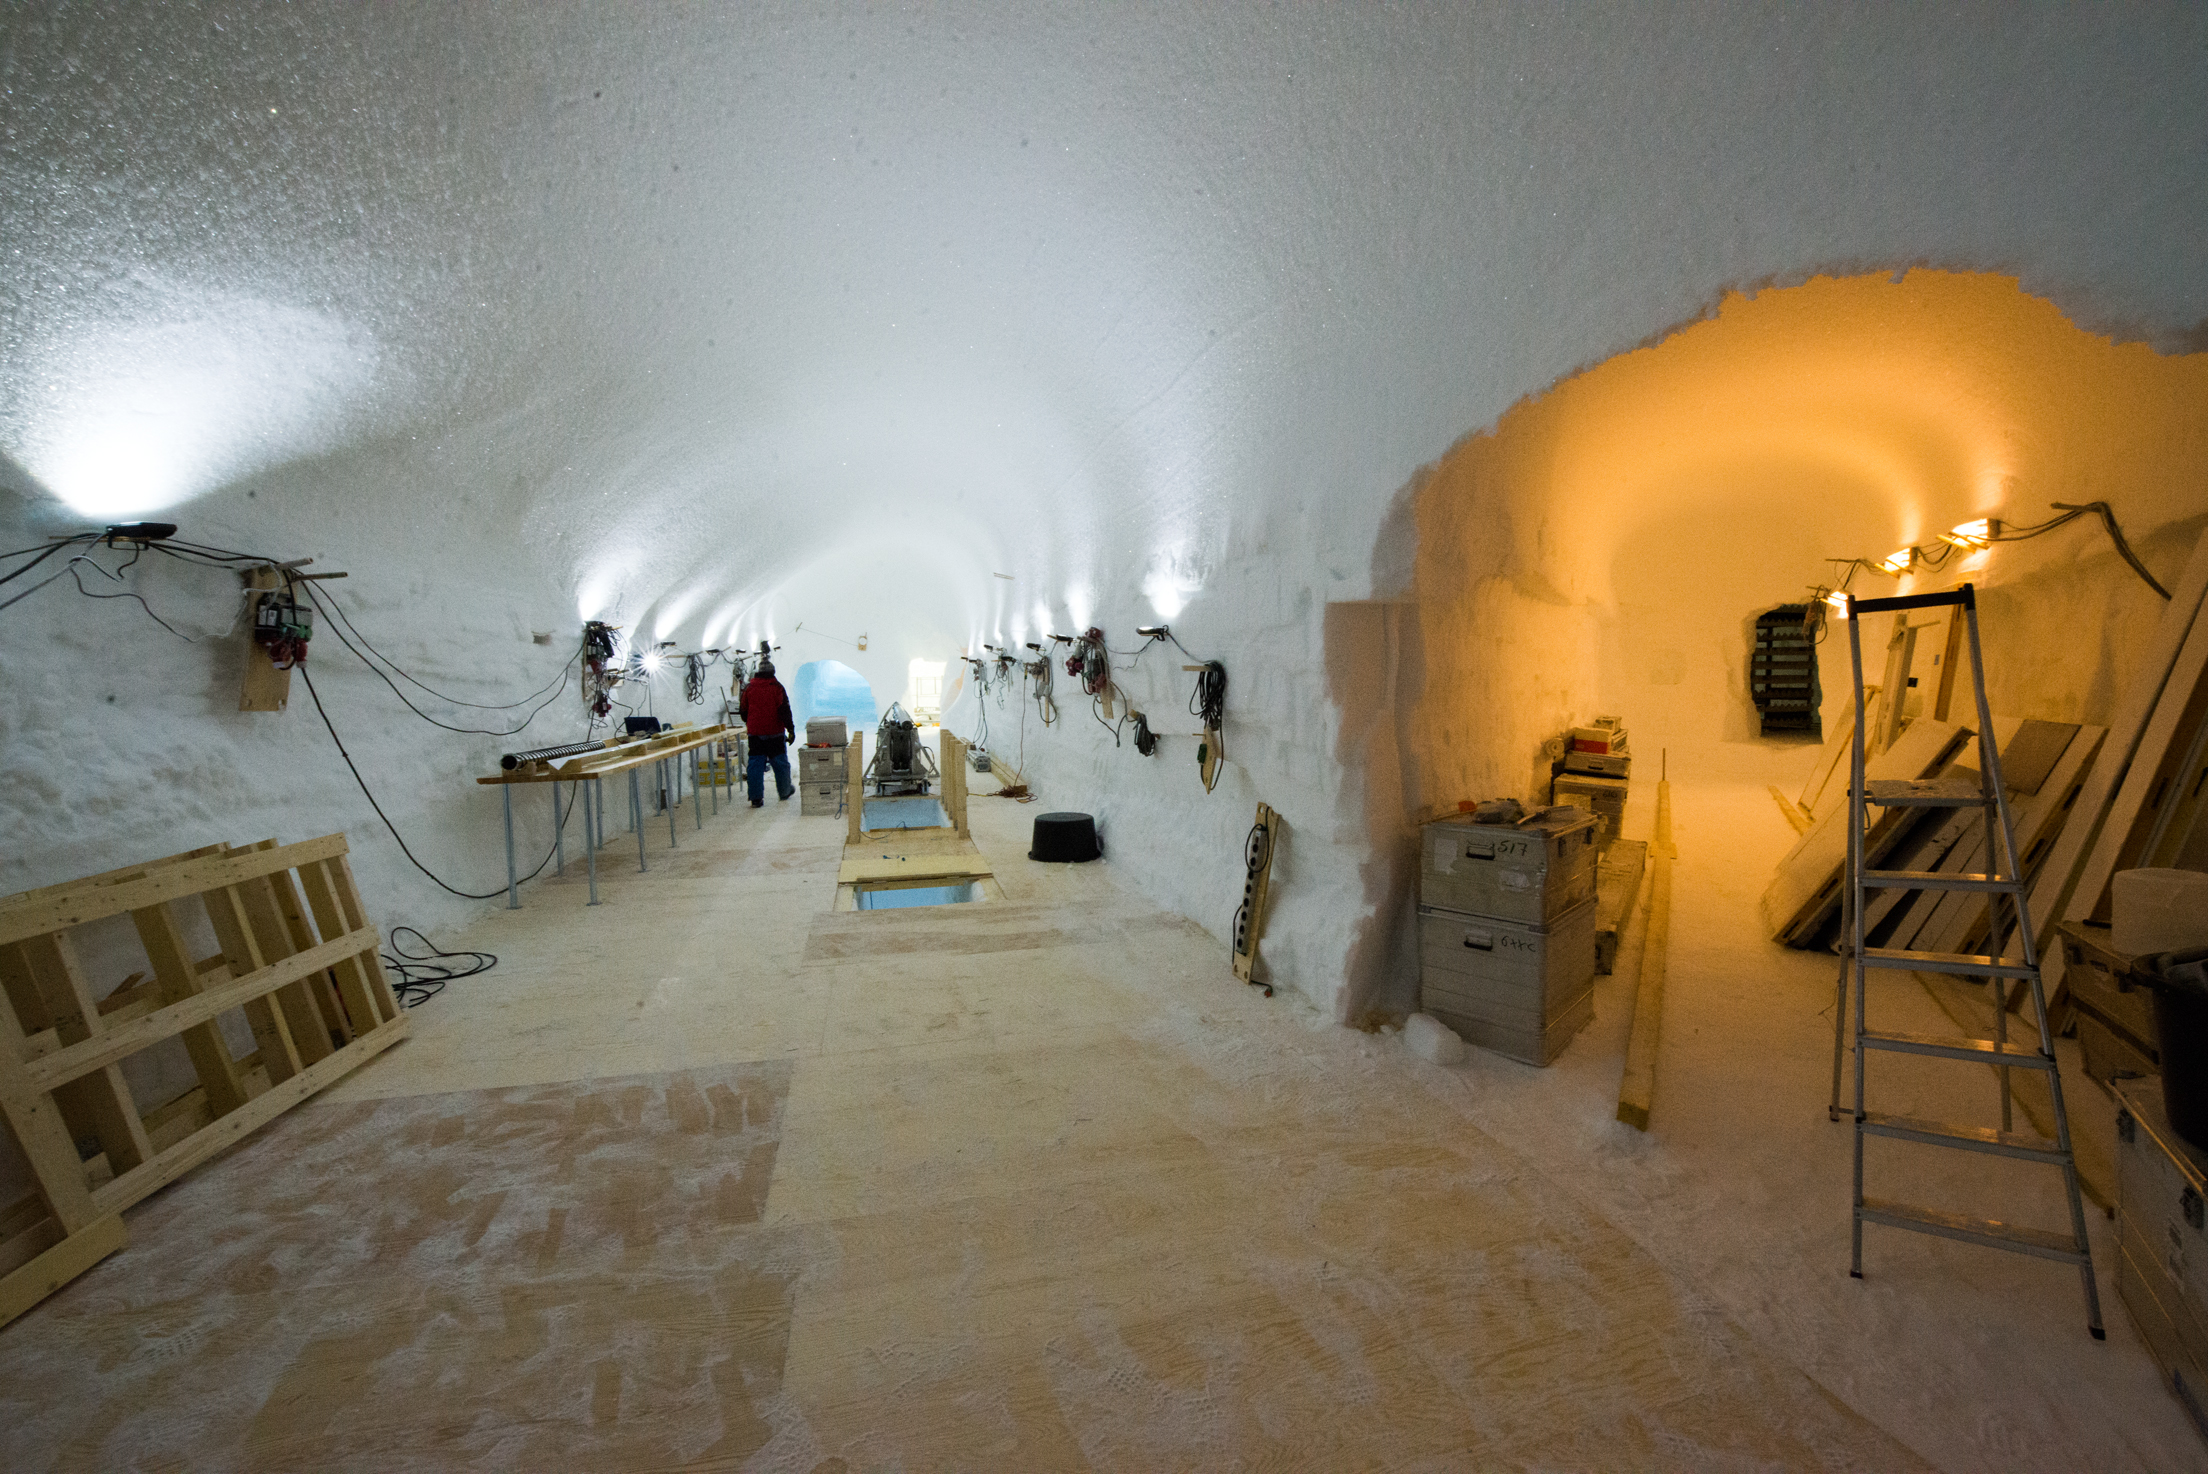 A look from where the drill trench meets the tunnel connecting the drill trench with the ice core storage.